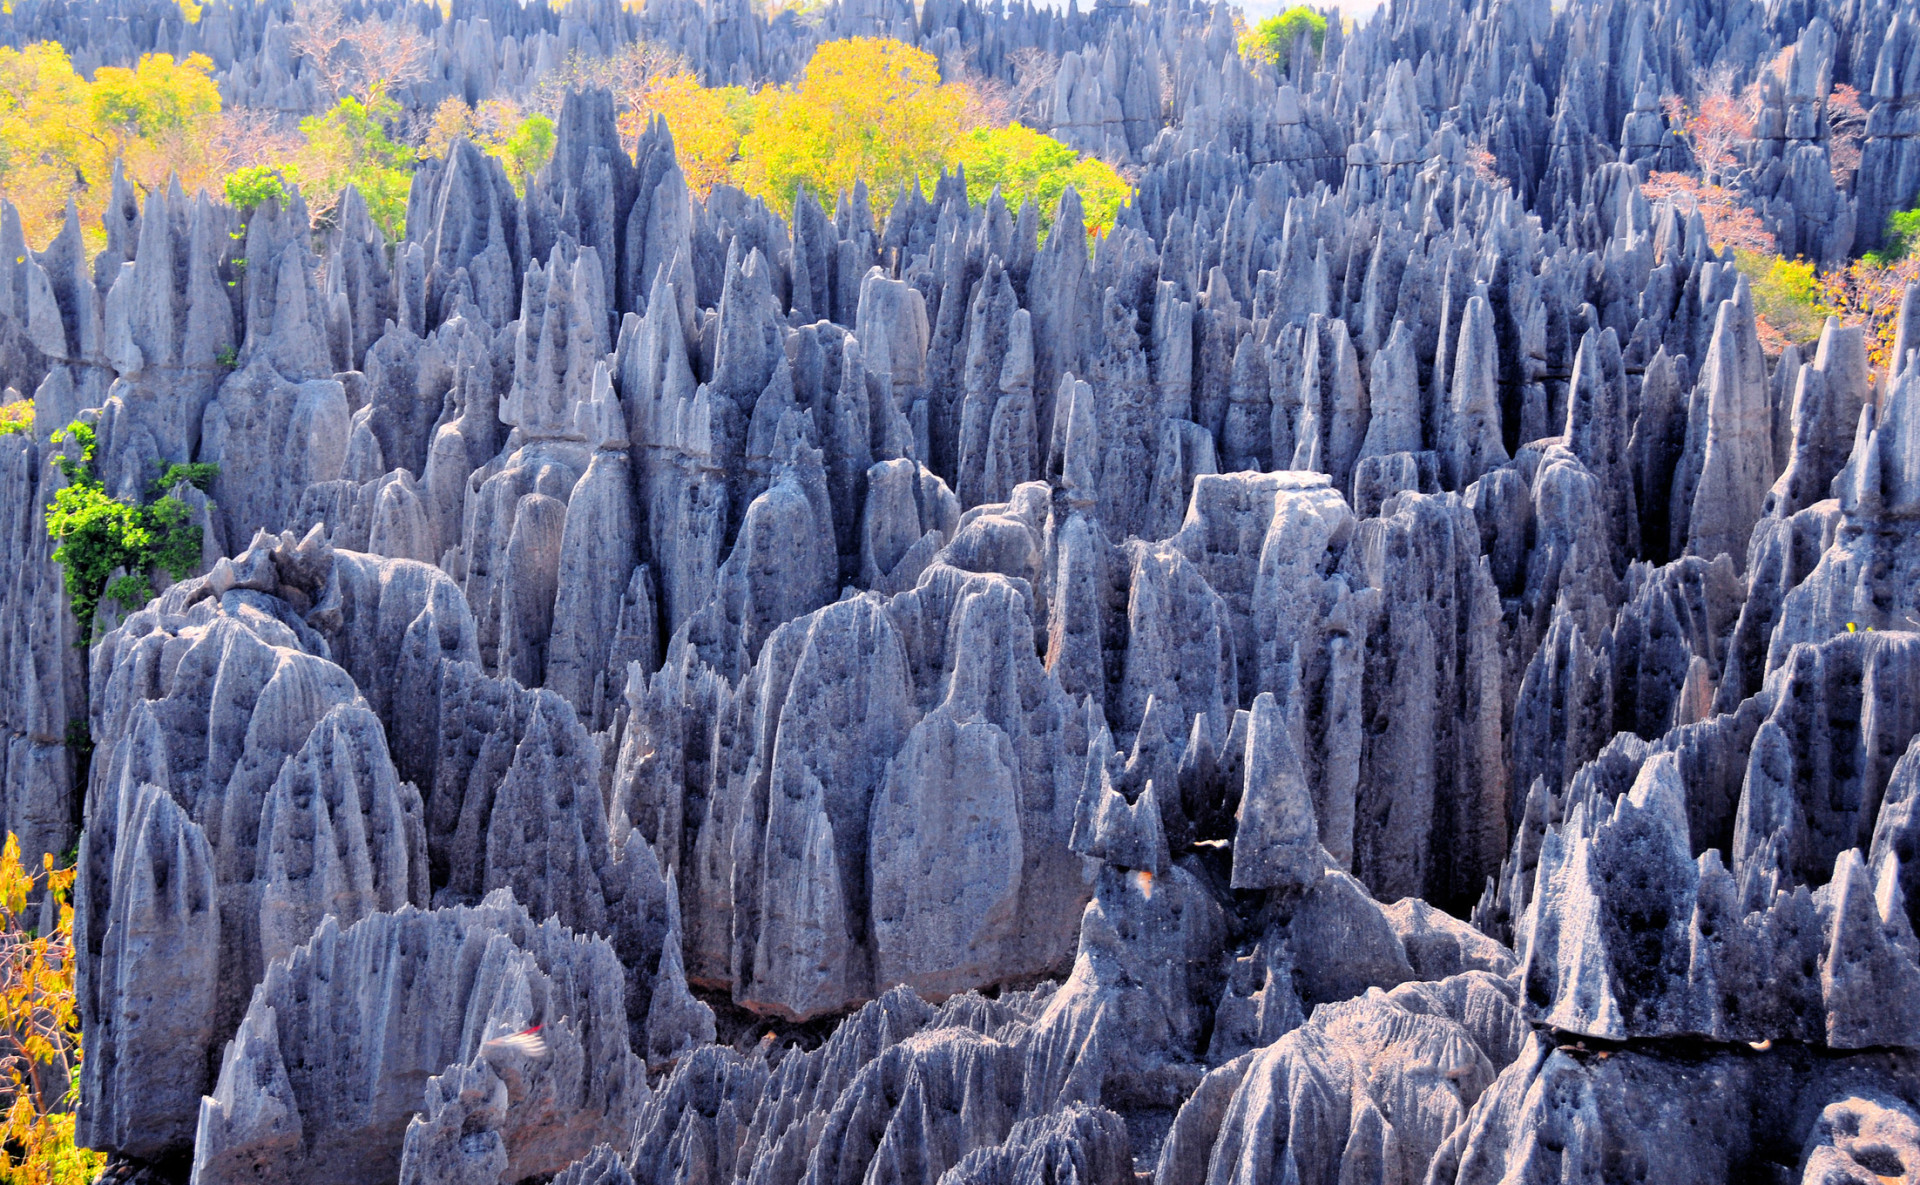 The UNESCO protected mineral forest of Tsingy de Bemaraha stands on the western coast of Madagascar. The astonishing limestone formations resemble blades and are razor sharp.<p>You may also like:<a href="https://www.starsinsider.com/n/257386?utm_source=msn.com&utm_medium=display&utm_campaign=referral_description&utm_content=265328v11en-us"> Successful celebrities who never finished high school</a></p>